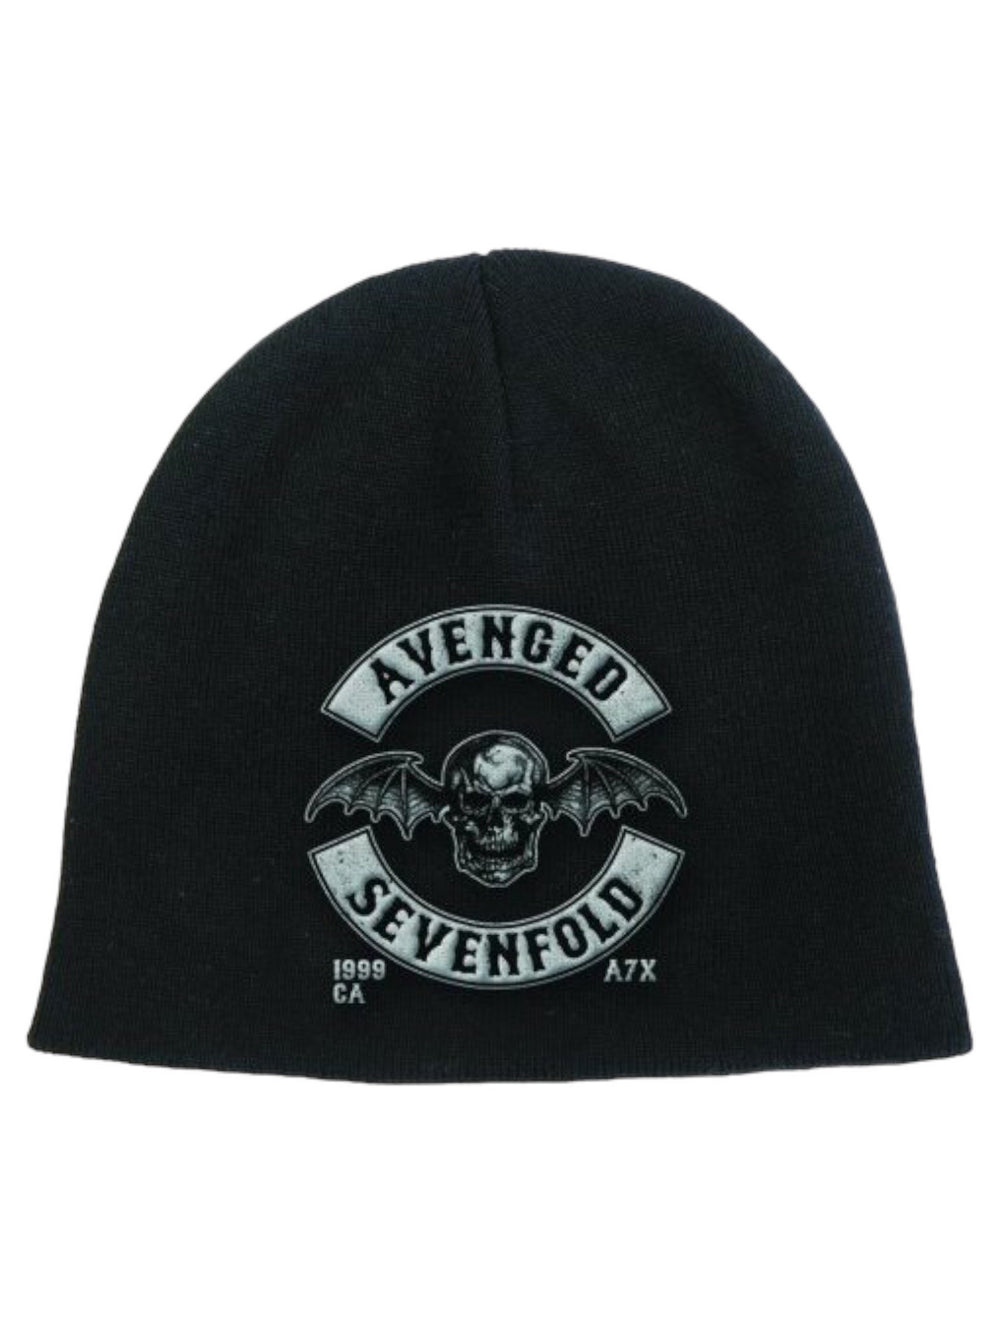 Avenged Sevenfold - Death Bat Crest Official Beanie Hat One Size Fits All NEW